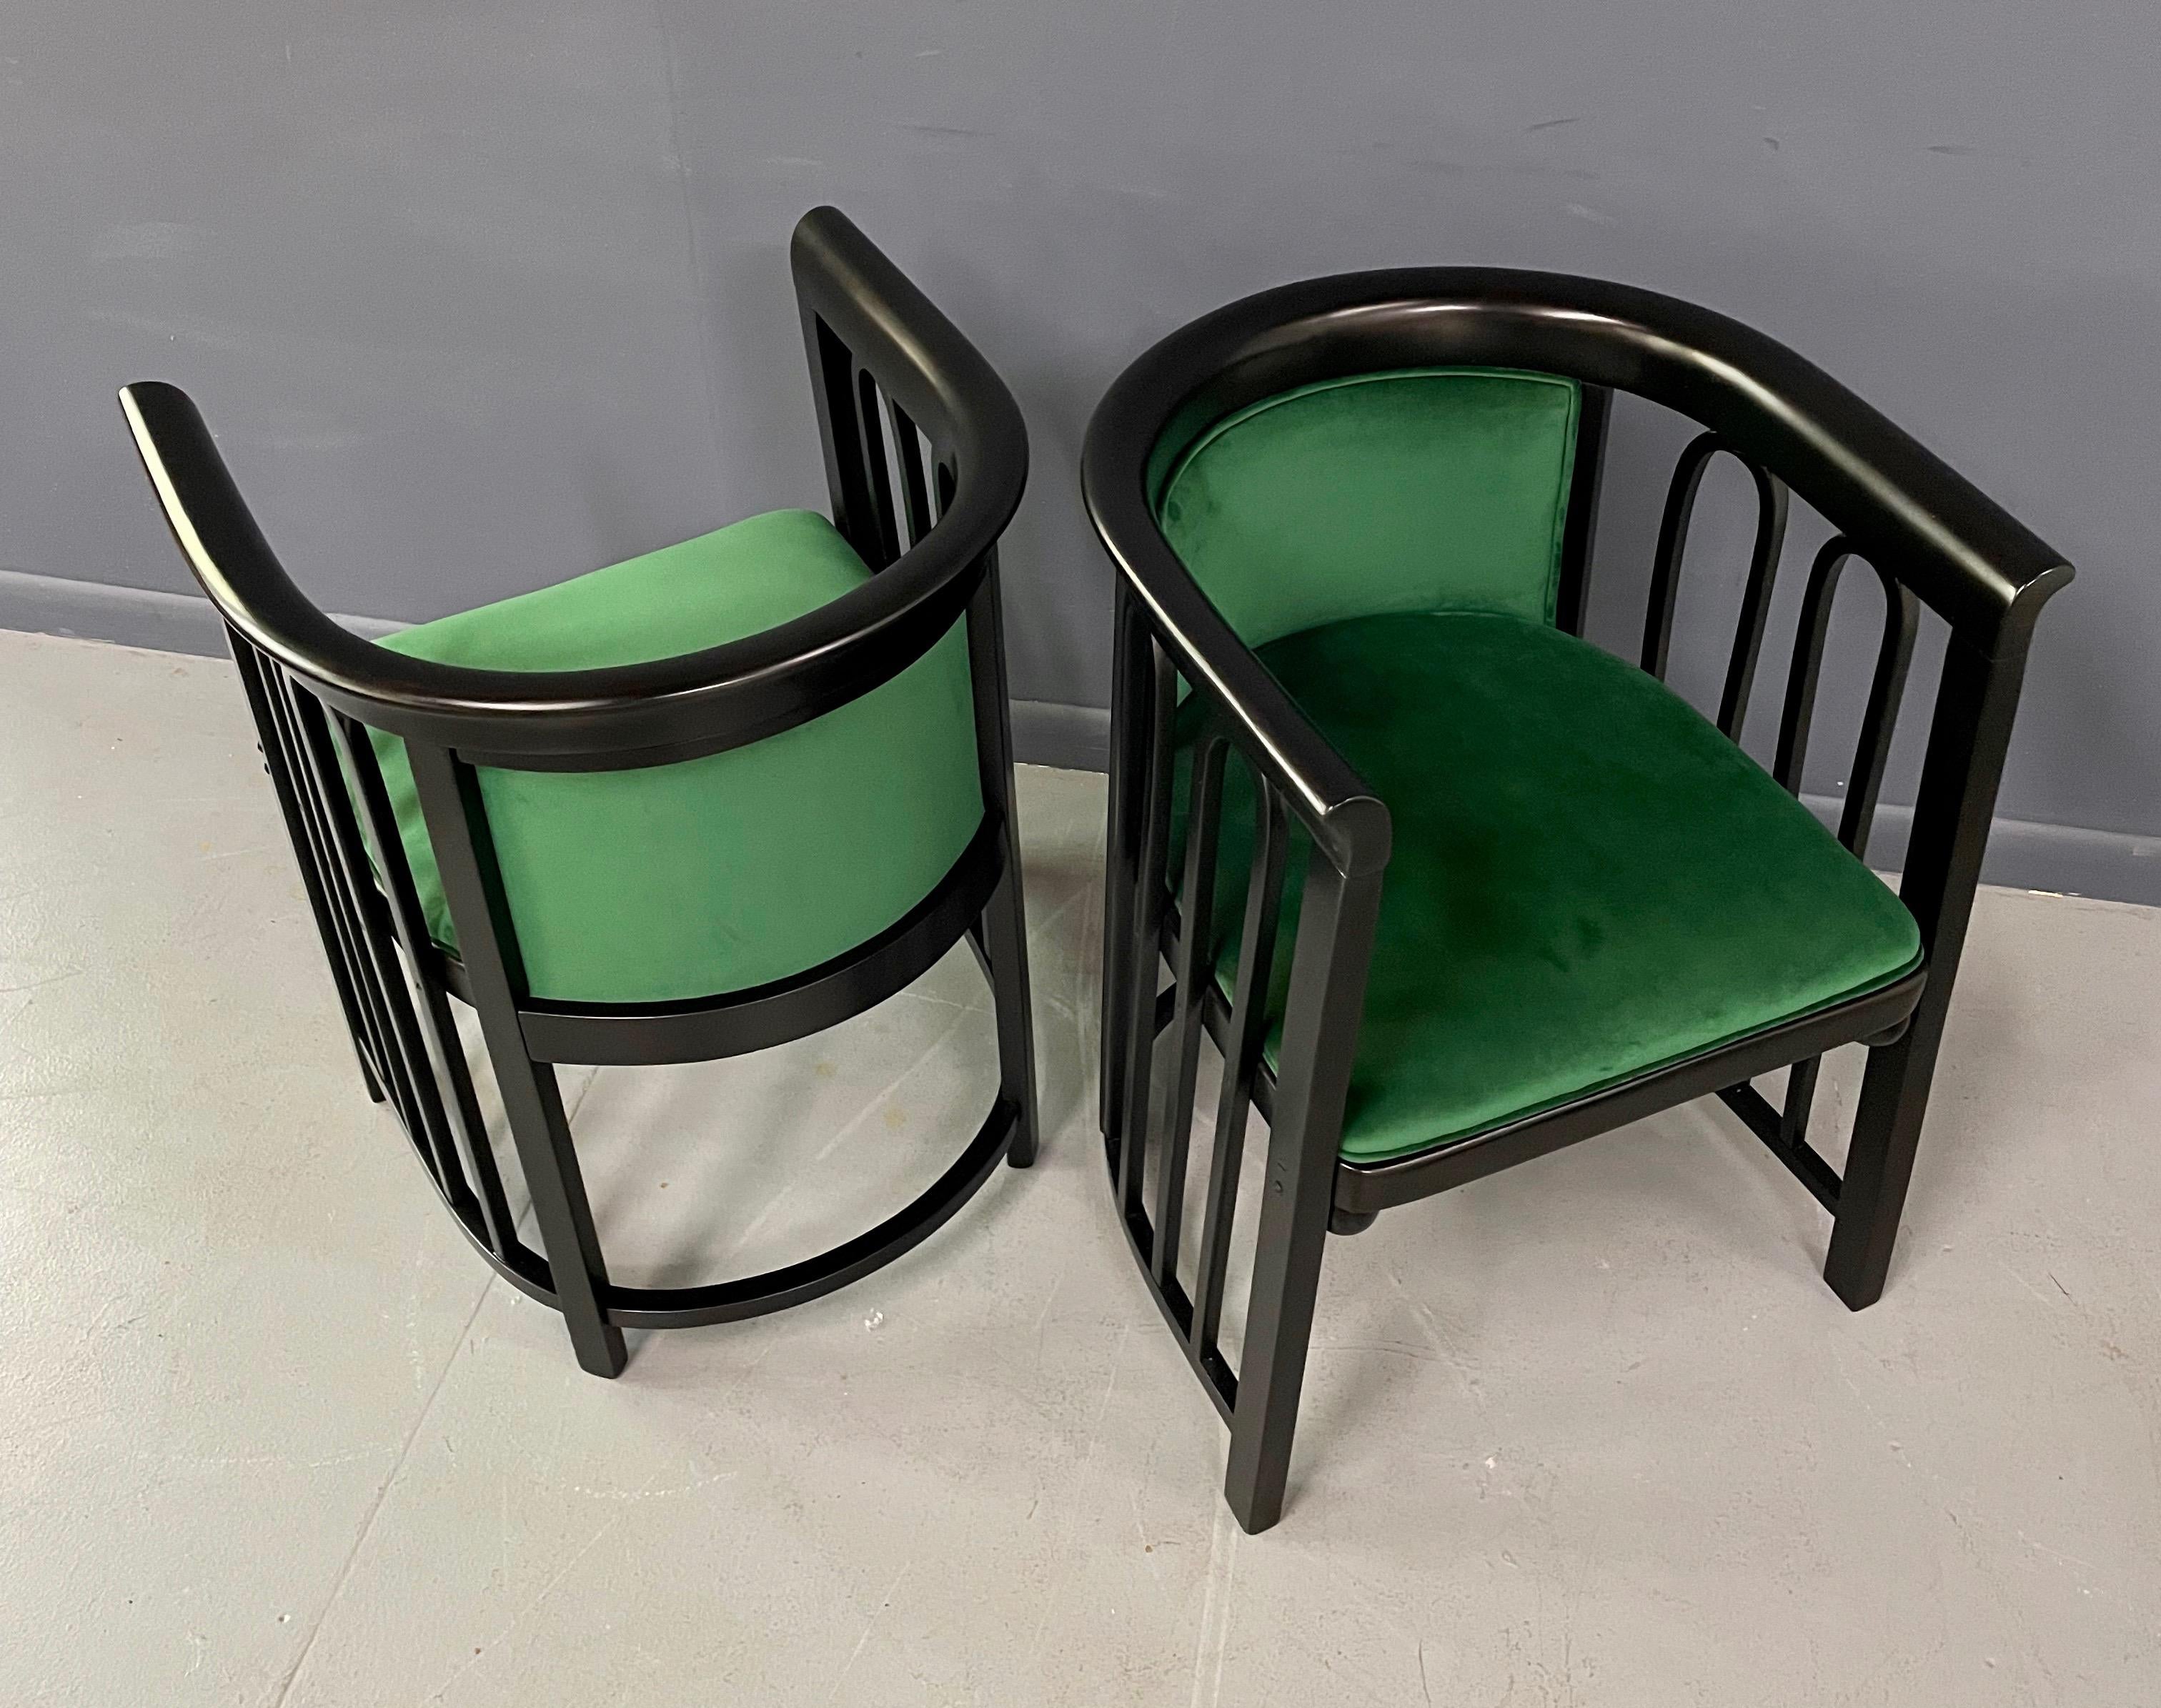 Josef Hoffman Pair of Secessionist Bentwood Barrel Back Arm Chairs for J&J Kohn In Good Condition For Sale In Philadelphia, PA